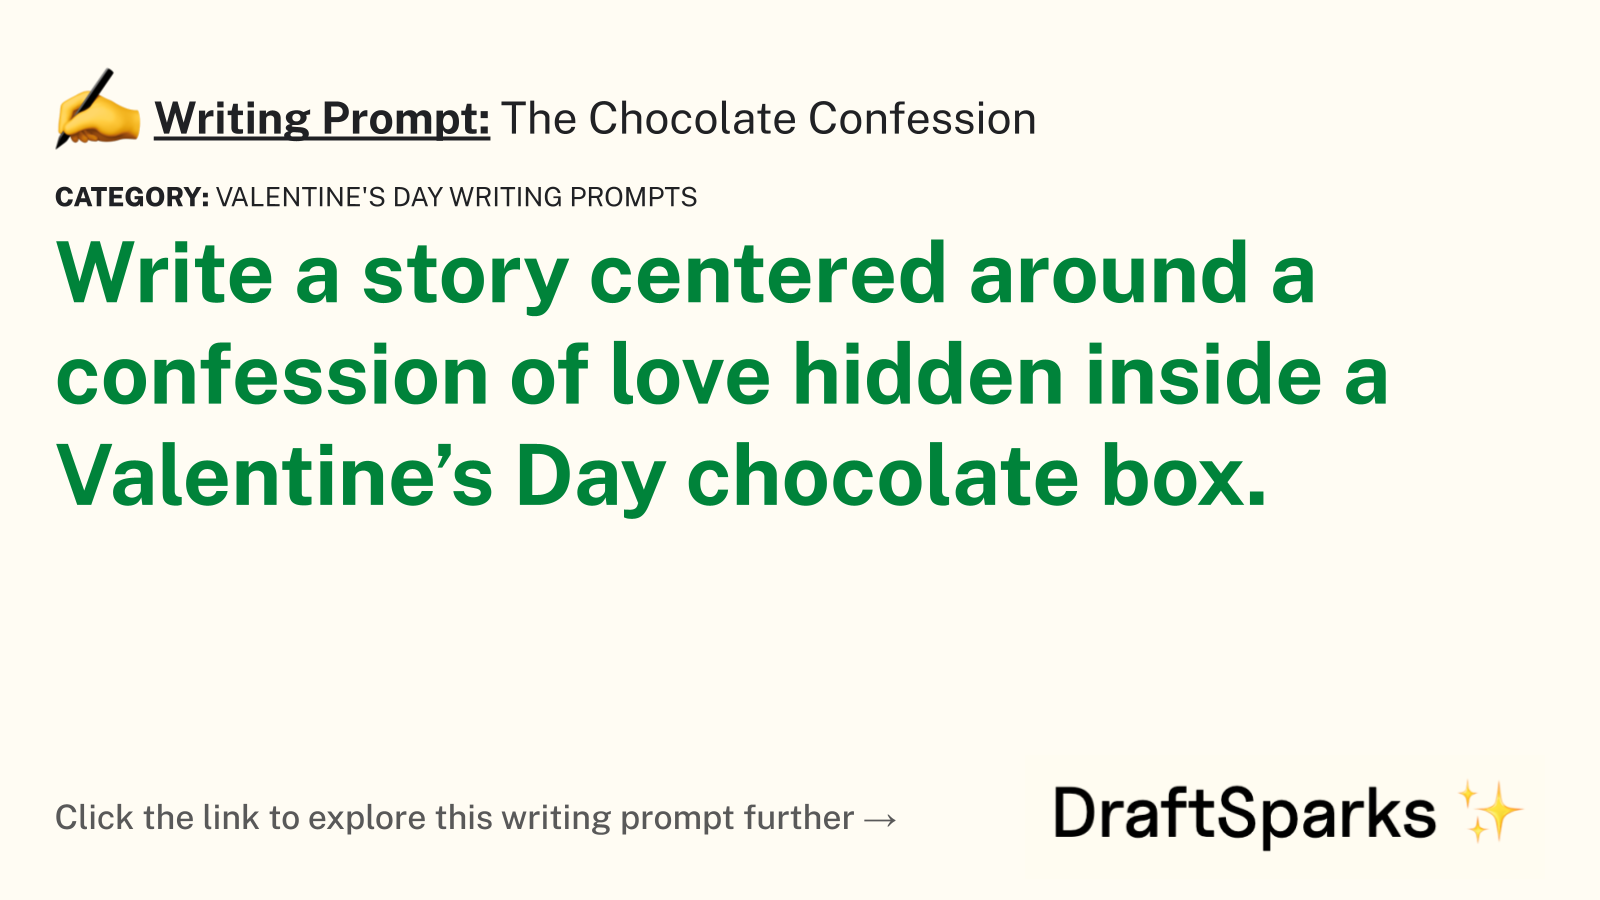 The Chocolate Confession